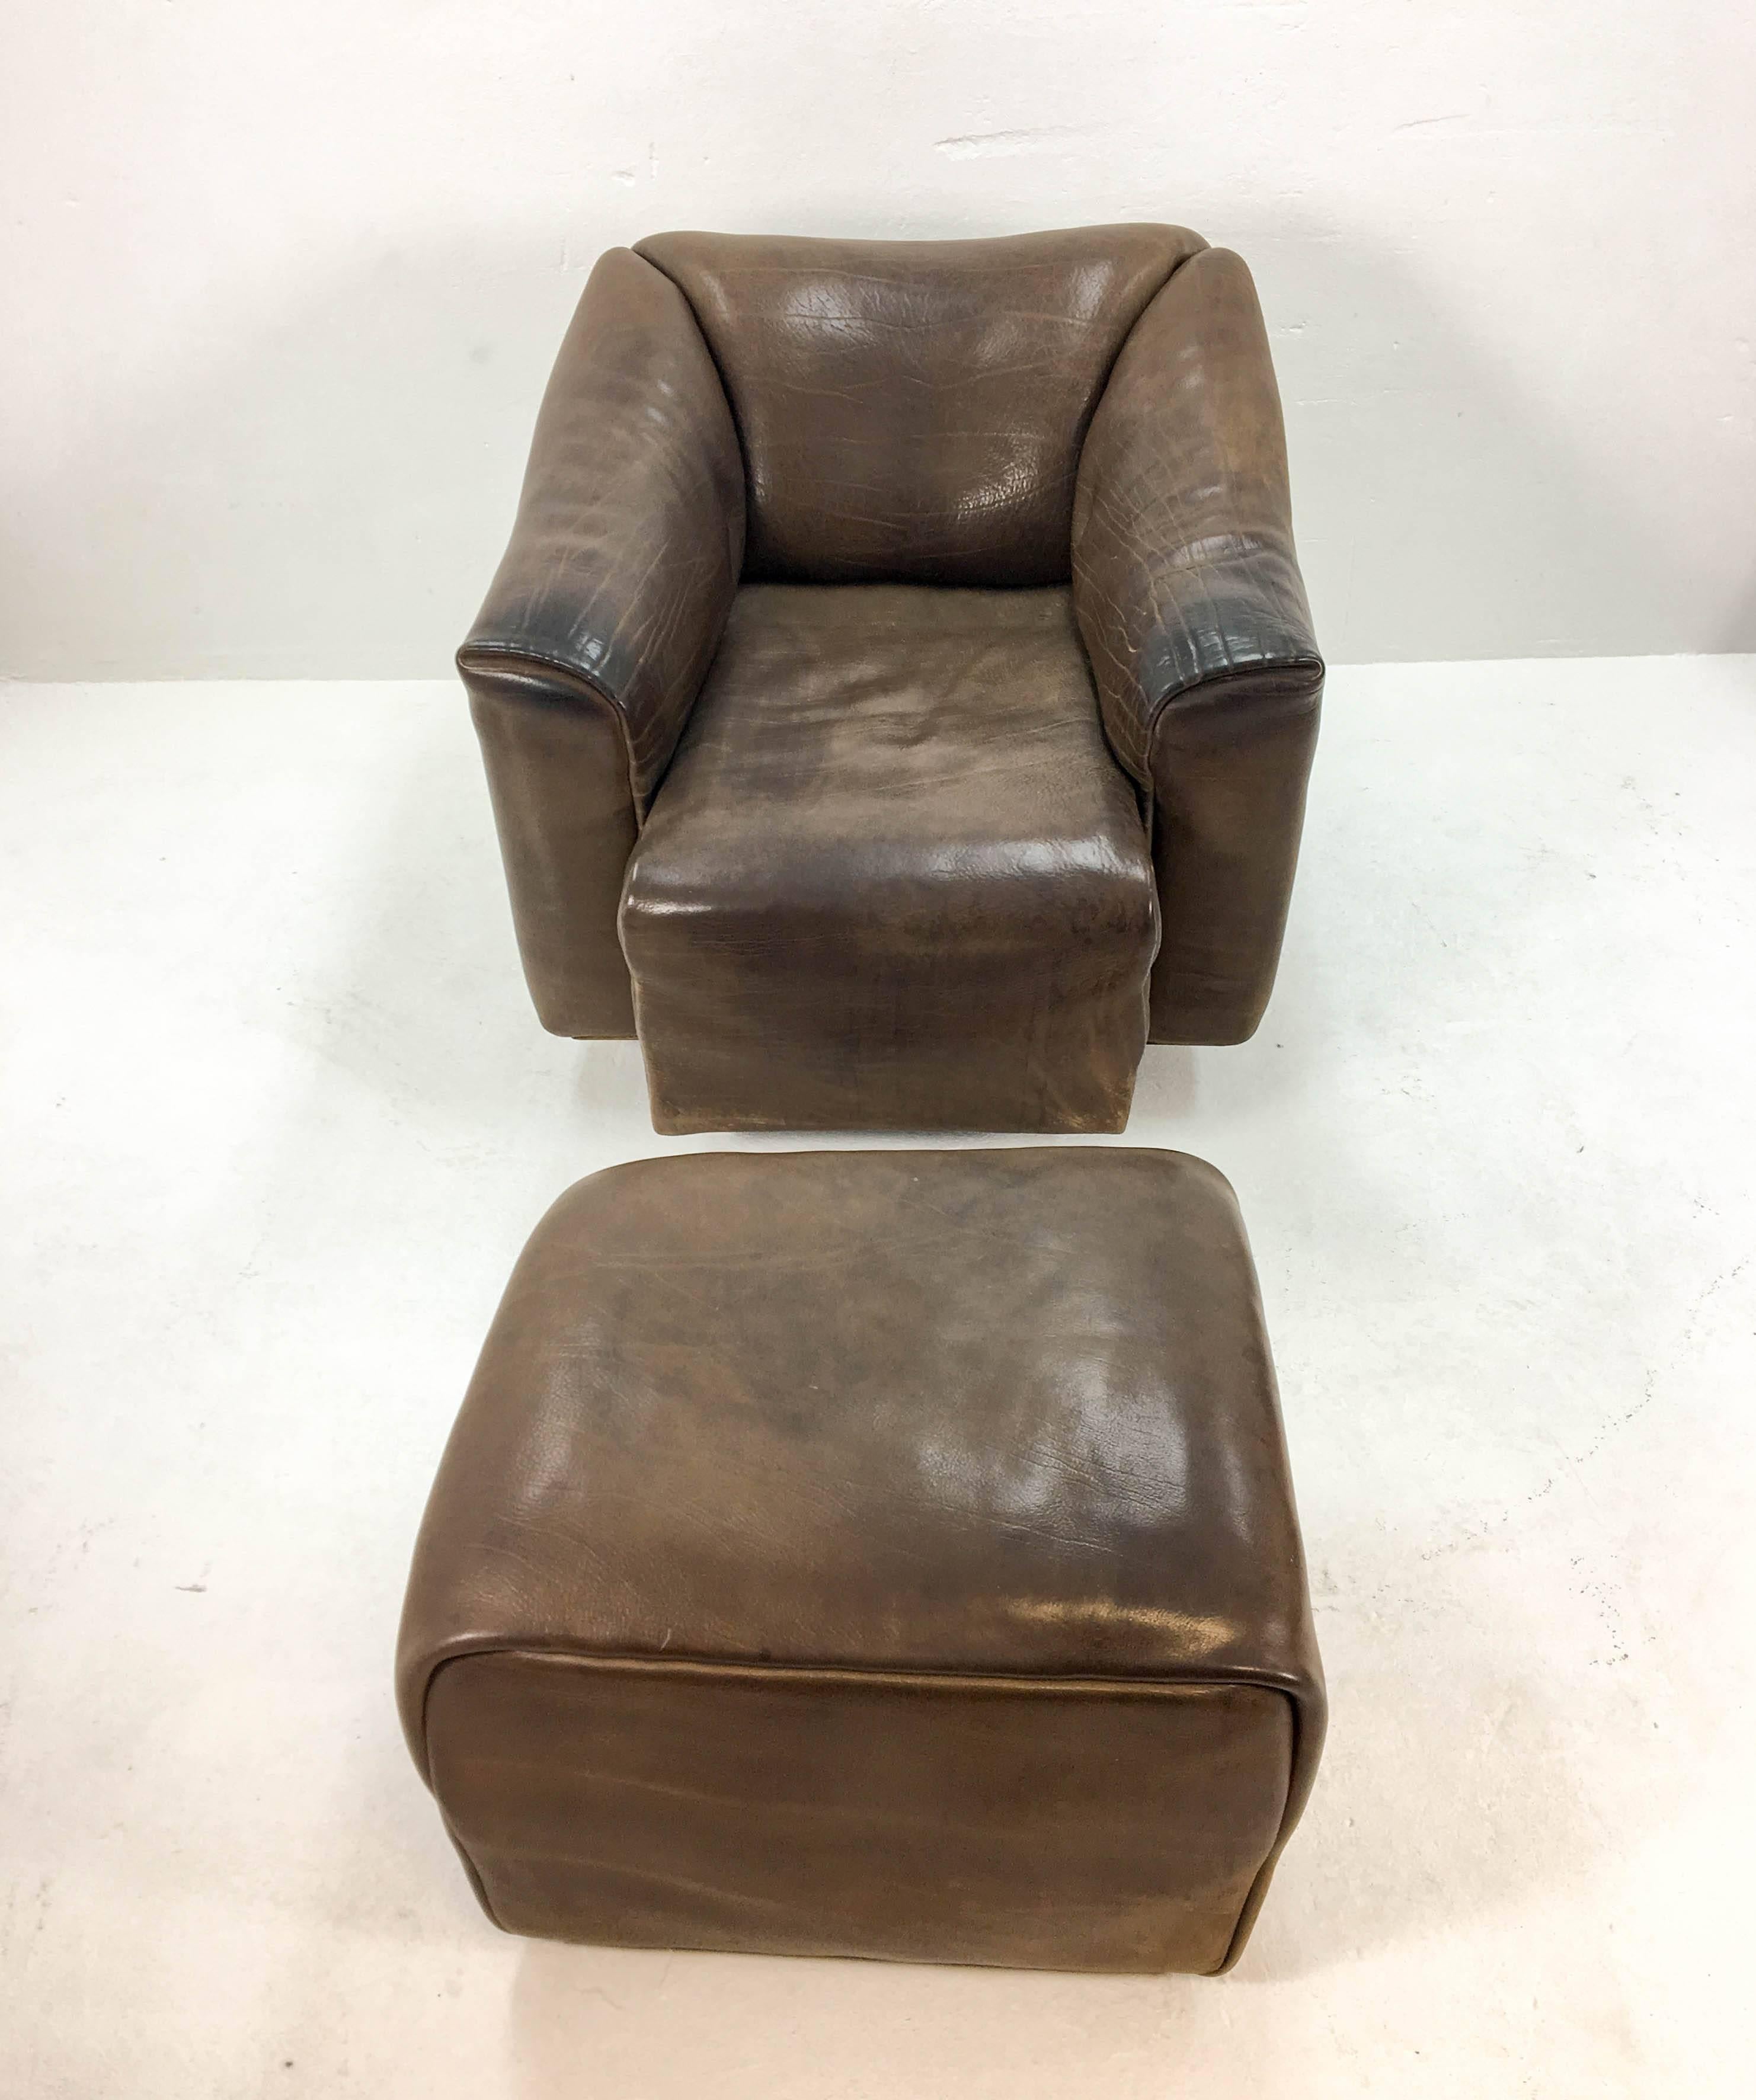 Great lounge chair in with matching ottoman from De Sede Switzerland, early 1970s. Very thick neck leather with a beautiful patina on a massive wooden frame. The seat can slide forward some 20cm for an even more relaxing seating position. Amazing